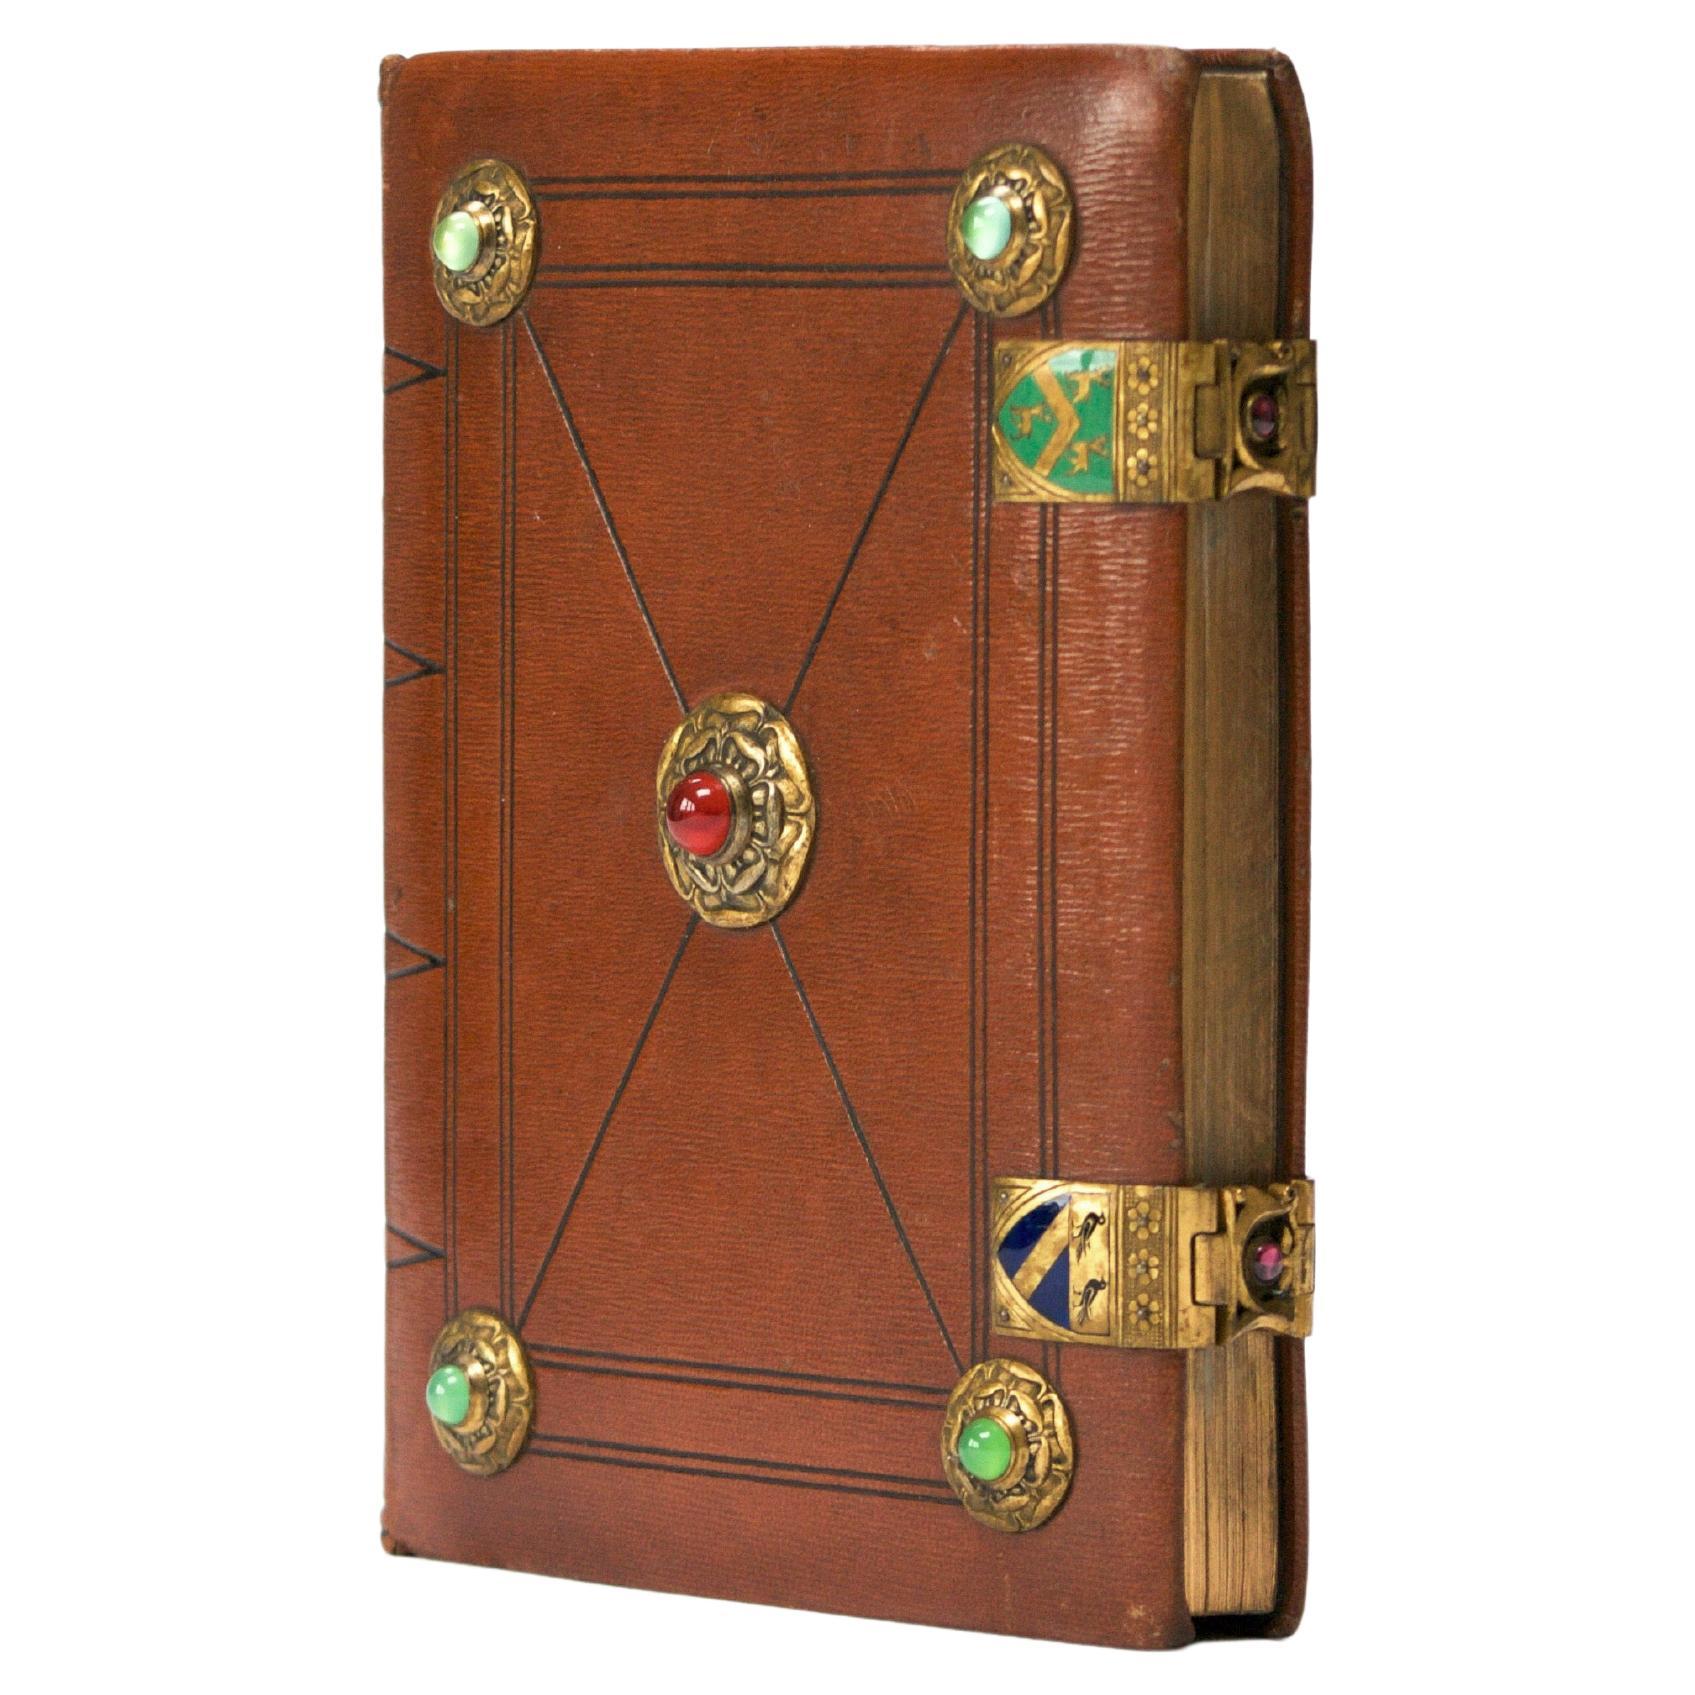 A Book of Common Prayer with Gilt-Metal and Hardstone Mounts